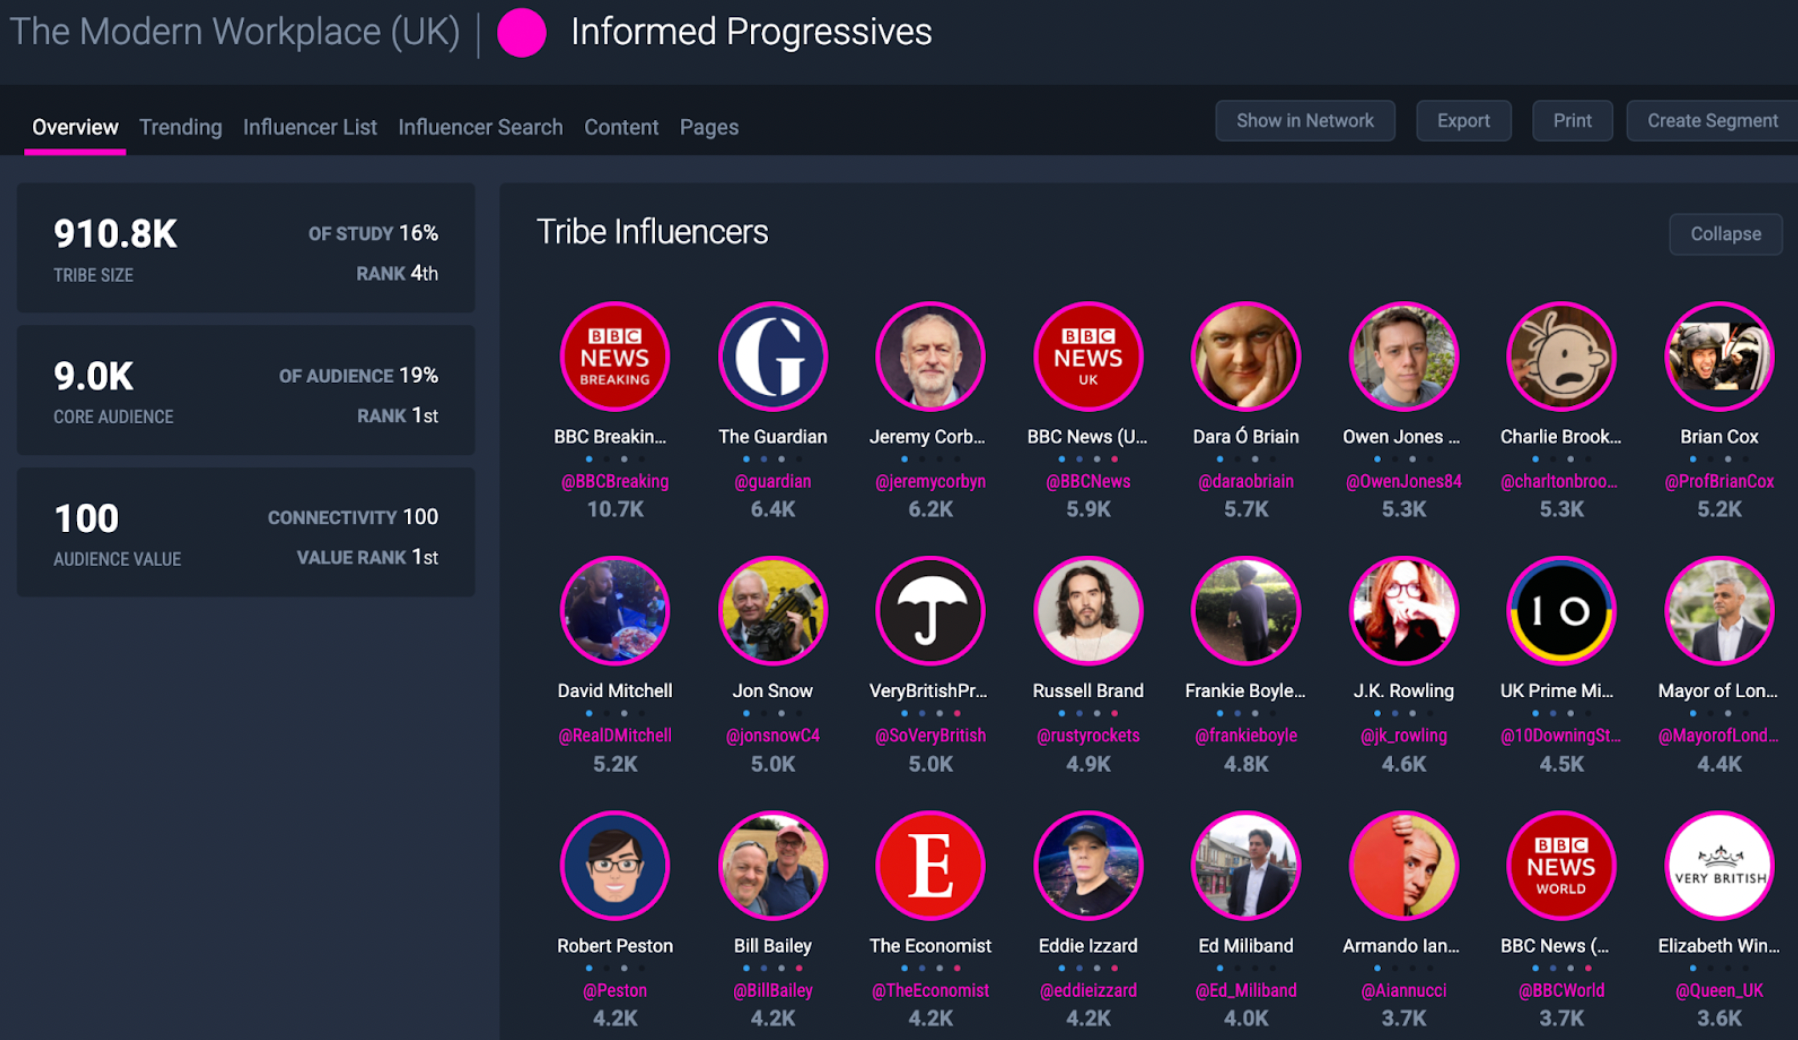 Figure 2: Top influencers amongst ‘Informed Progressives’ include BBC Breaking News, The Guardian and Jeremy Corbyn.